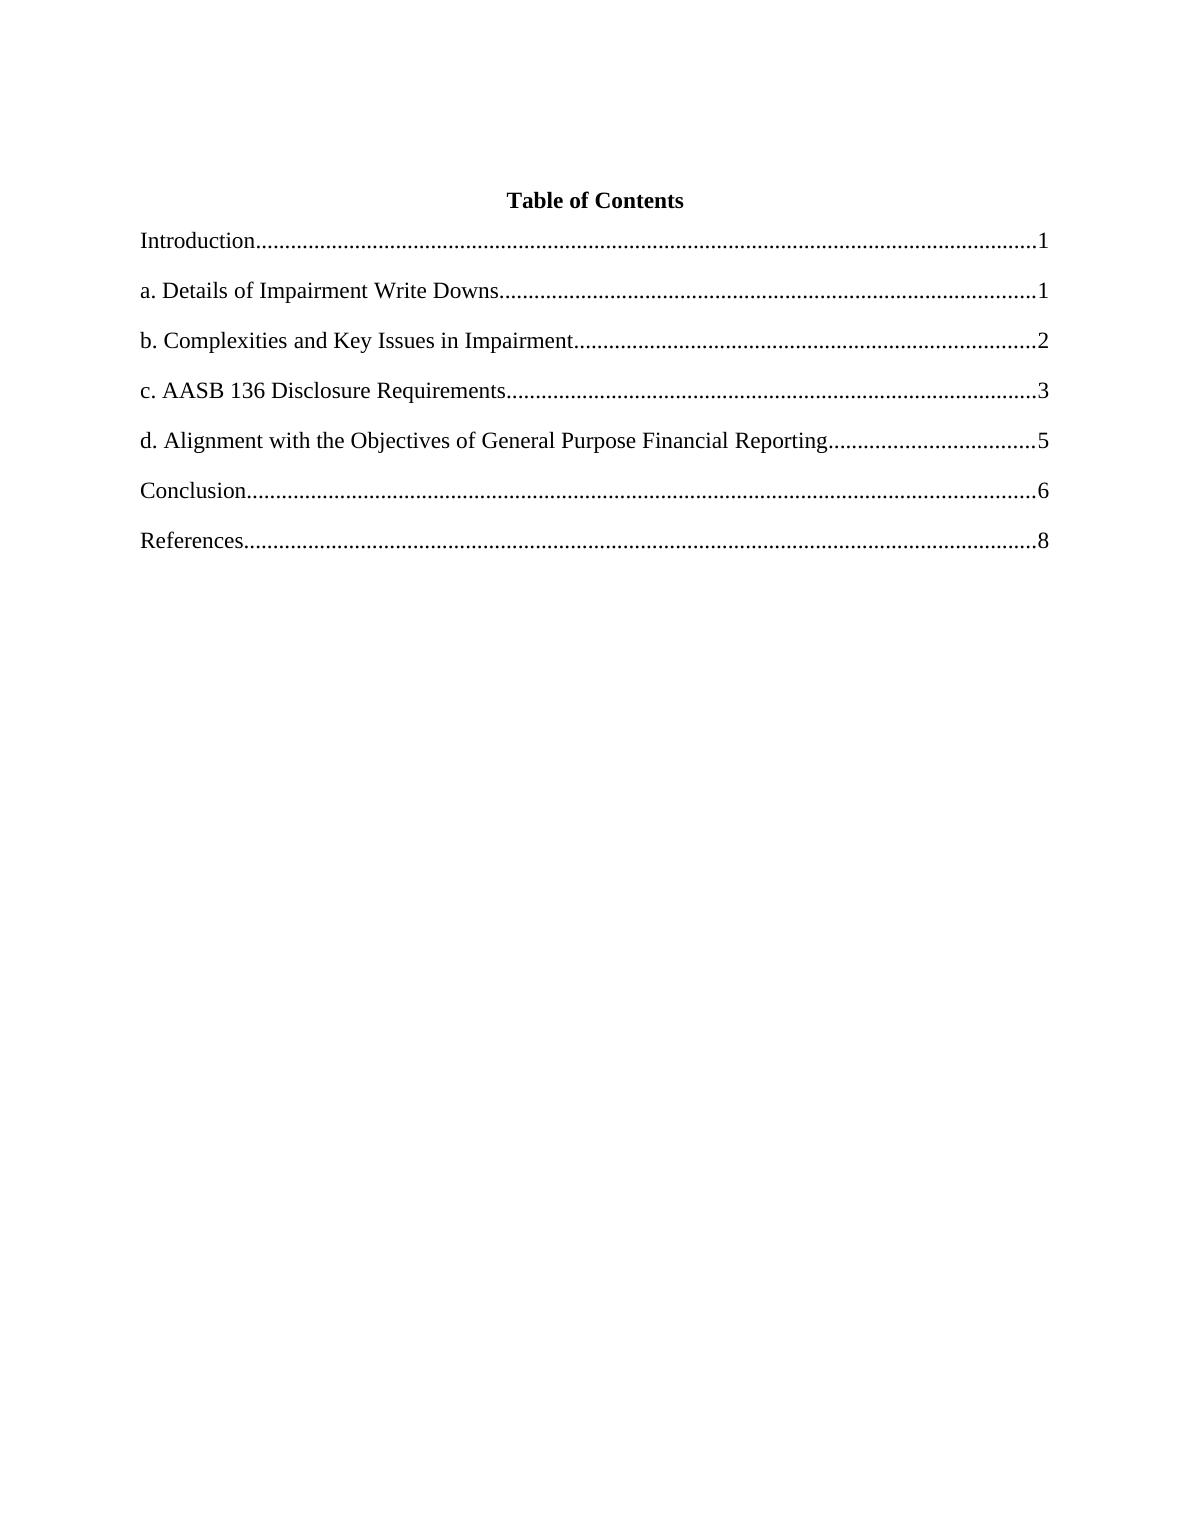 Accounting standards and Practice PDF_3